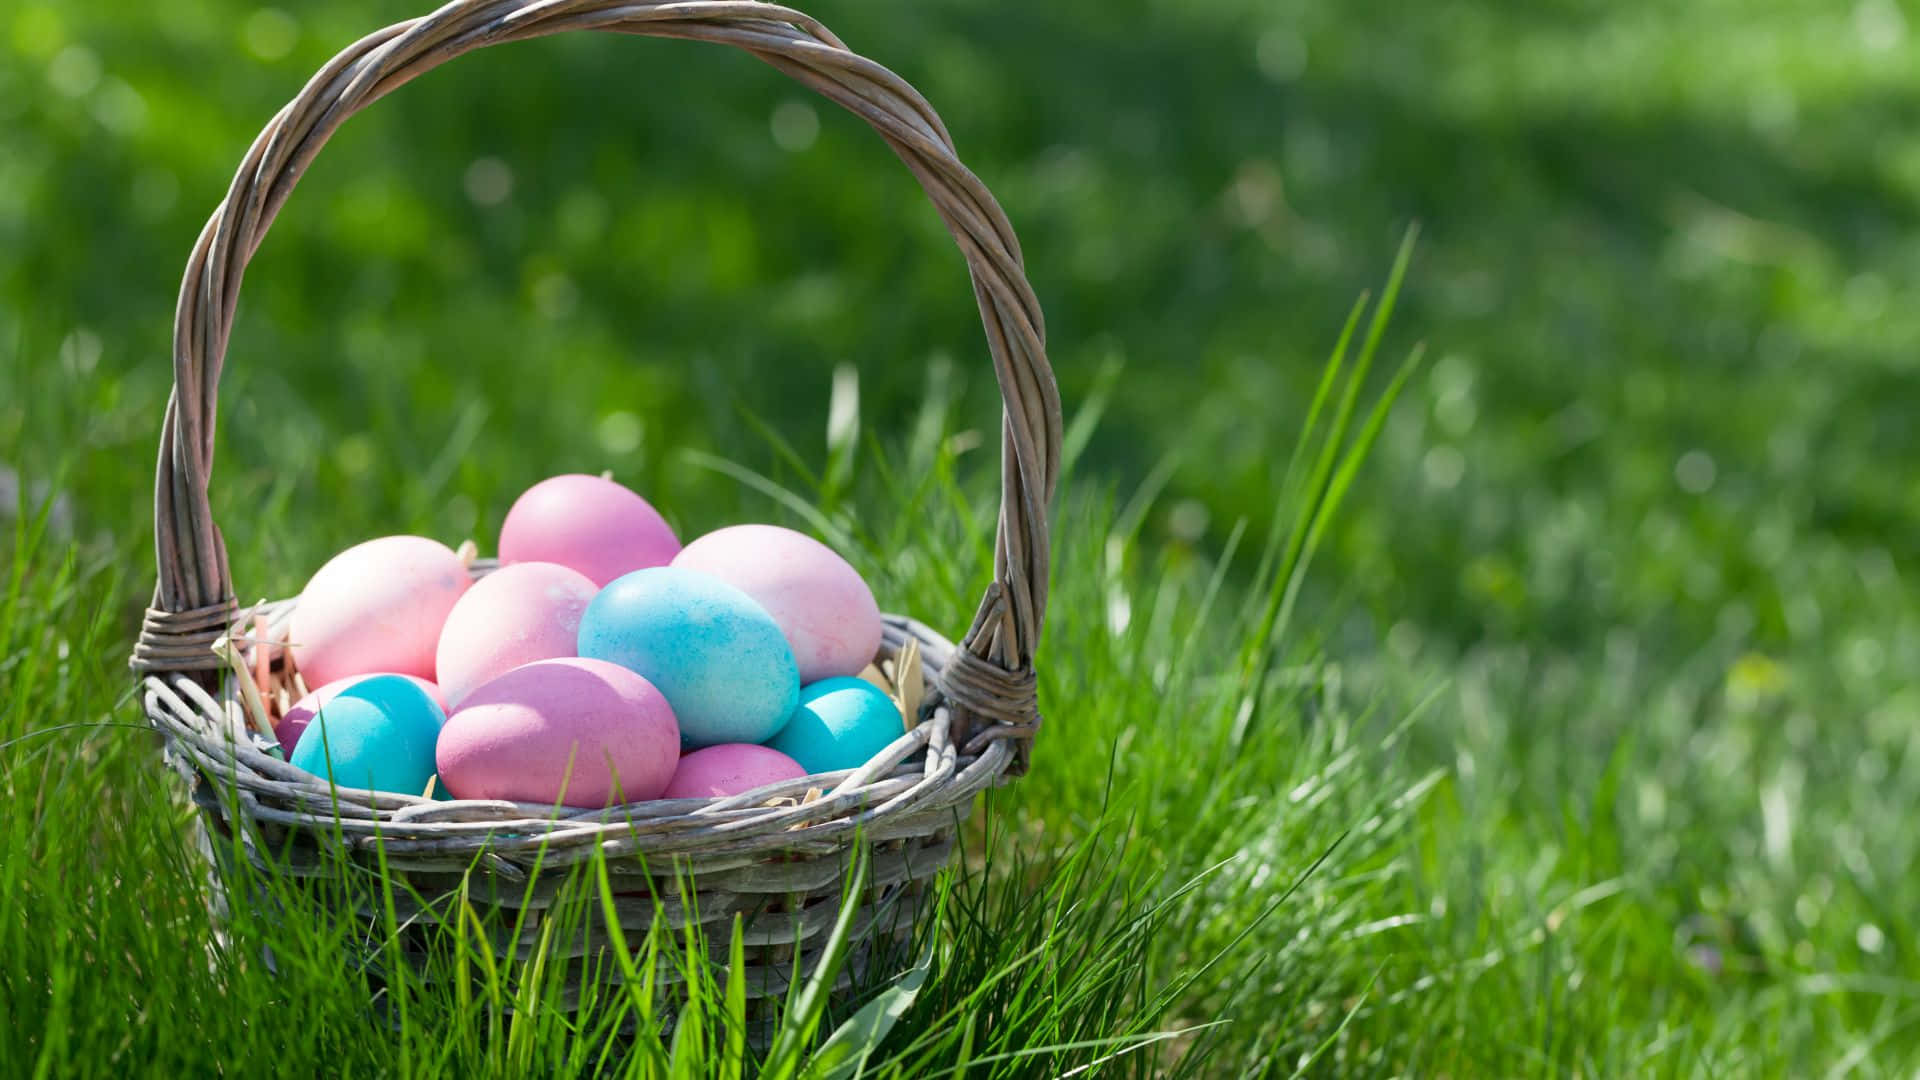 Celebrate Easter with a colorful basket of treats! Wallpaper